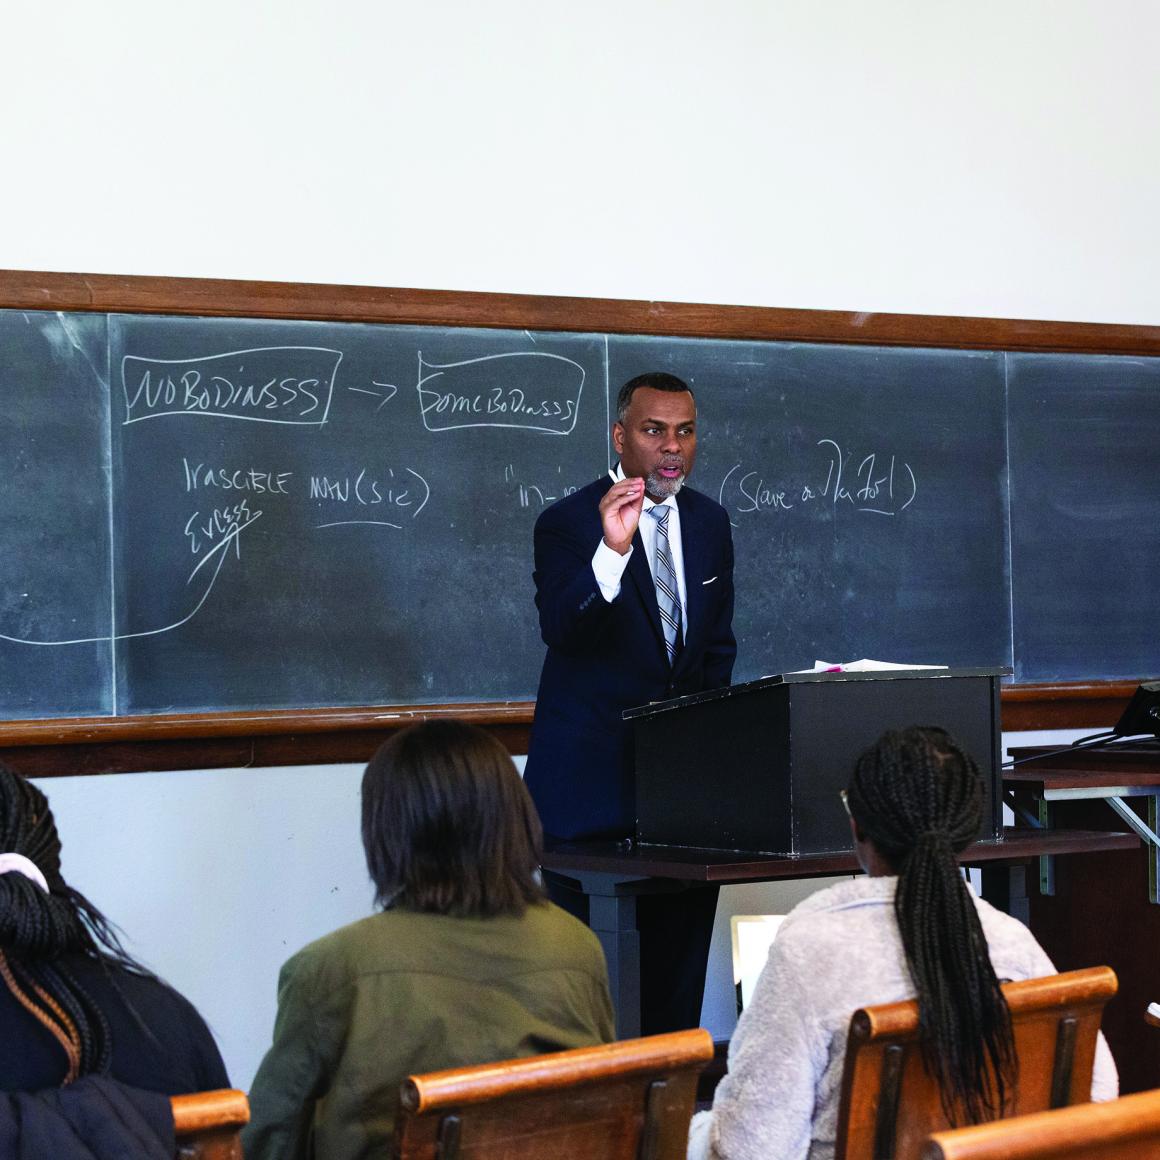 Professor Eddie Glaude delivers a lecture to students